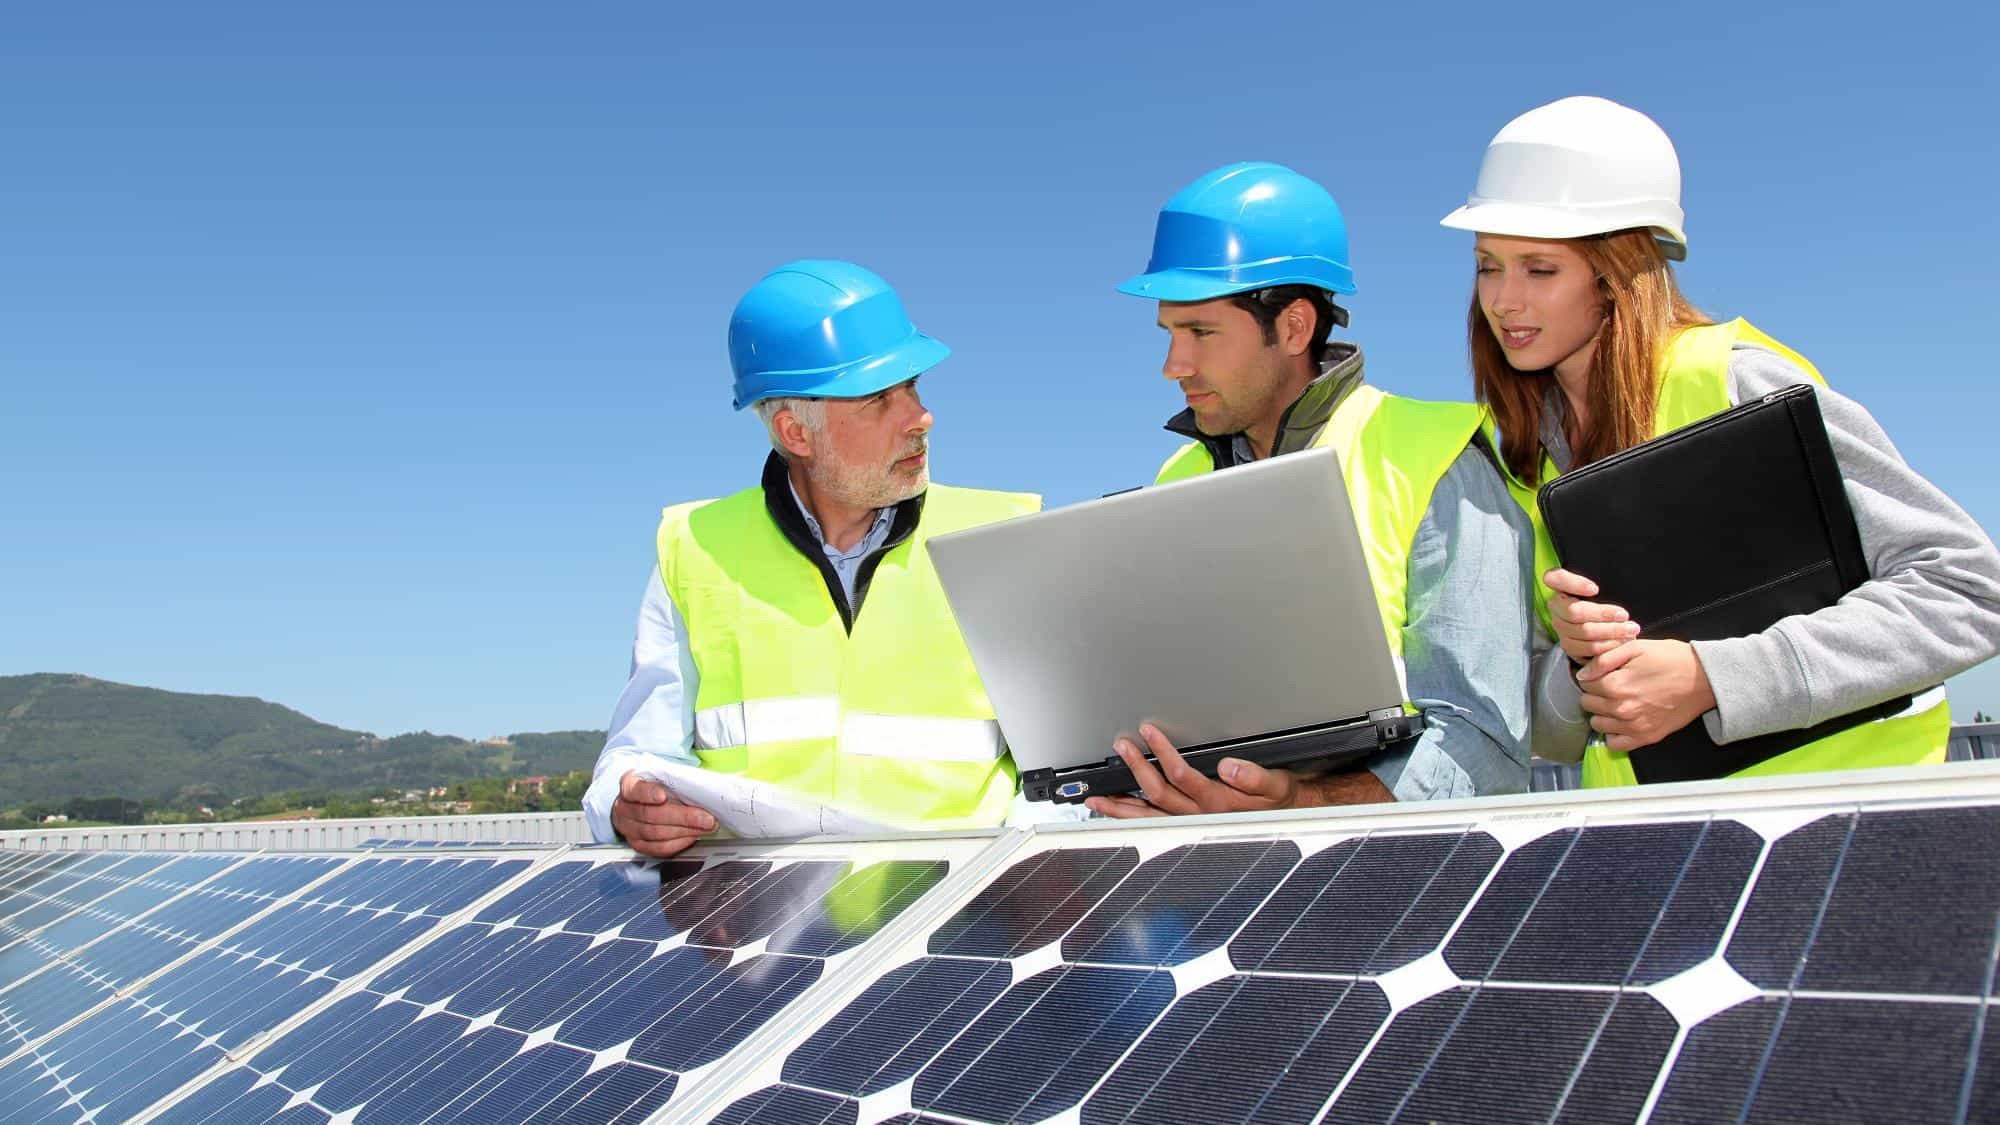 Sustainability Photovoltaic System Operation and Maintenance